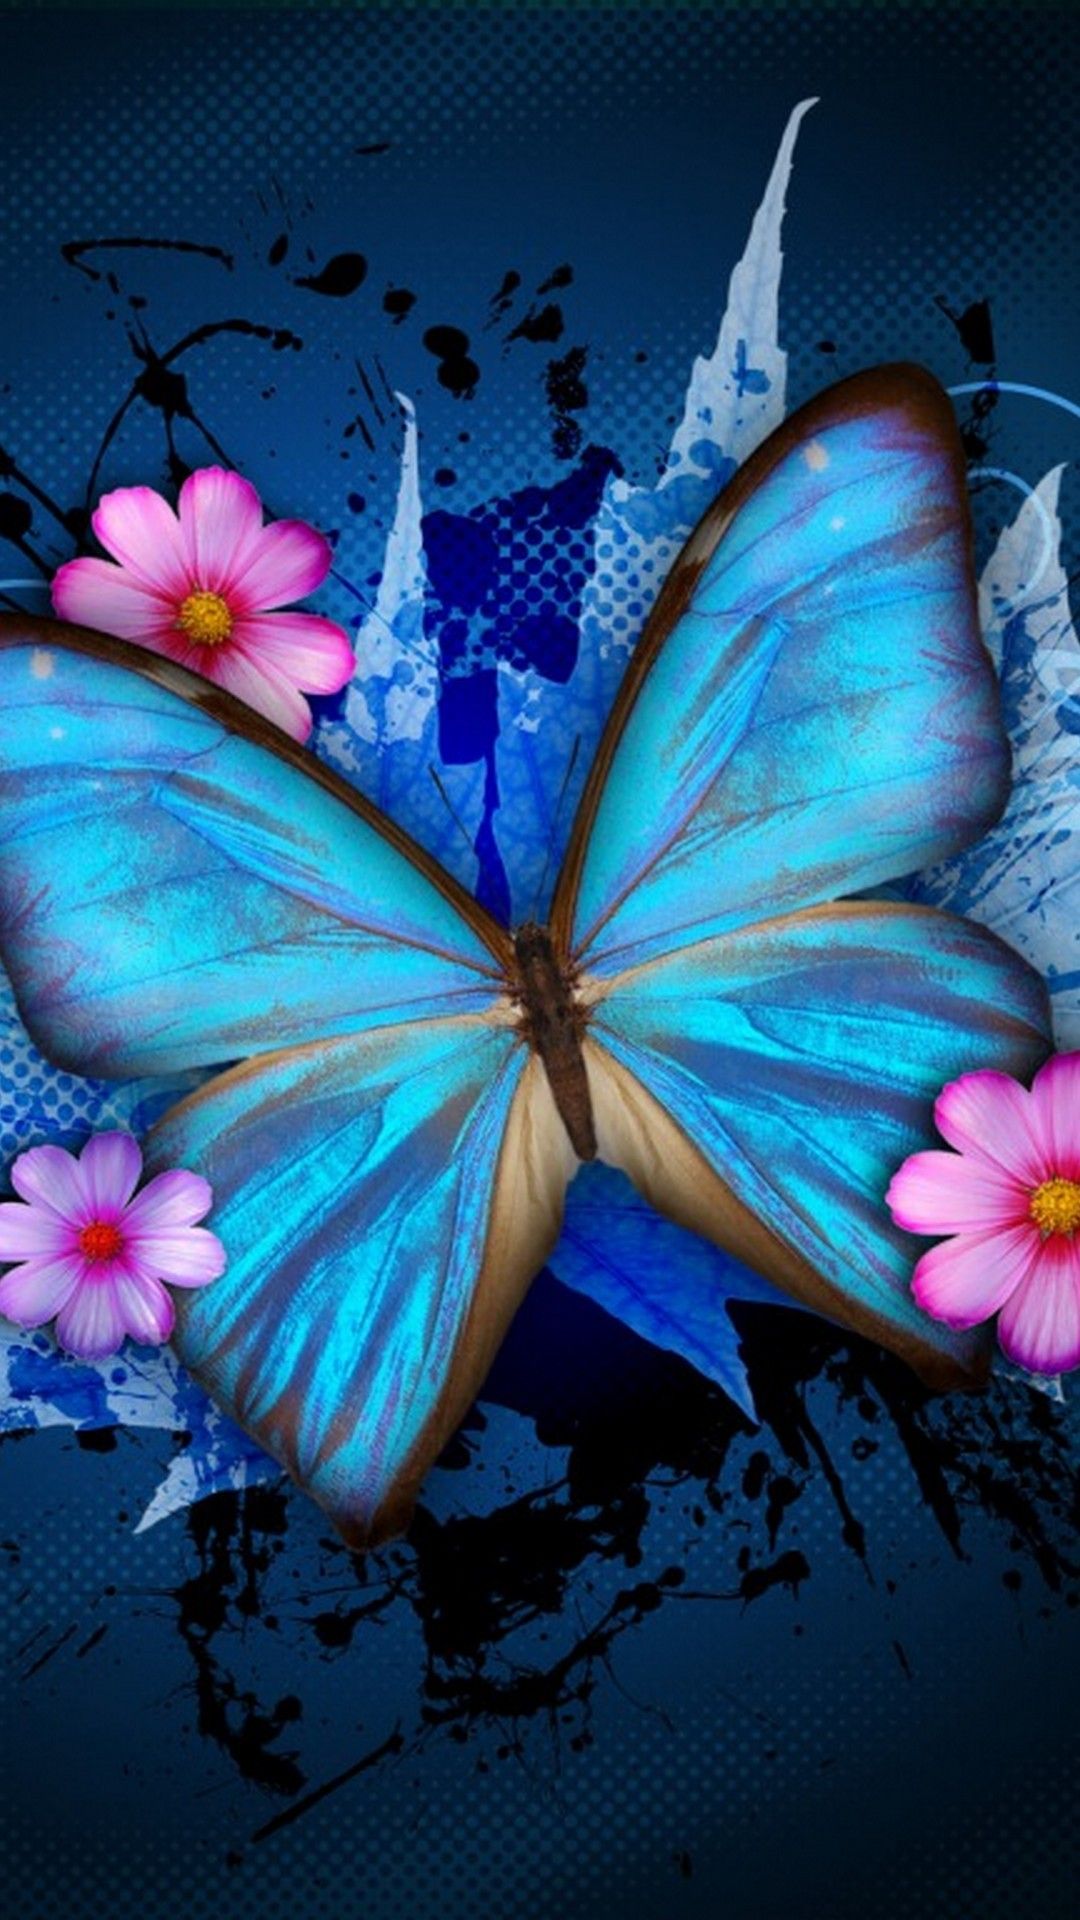 Wallpaper Phone Blue Butterfly With HD Resolution Photo For Proflie HD Wallpaper